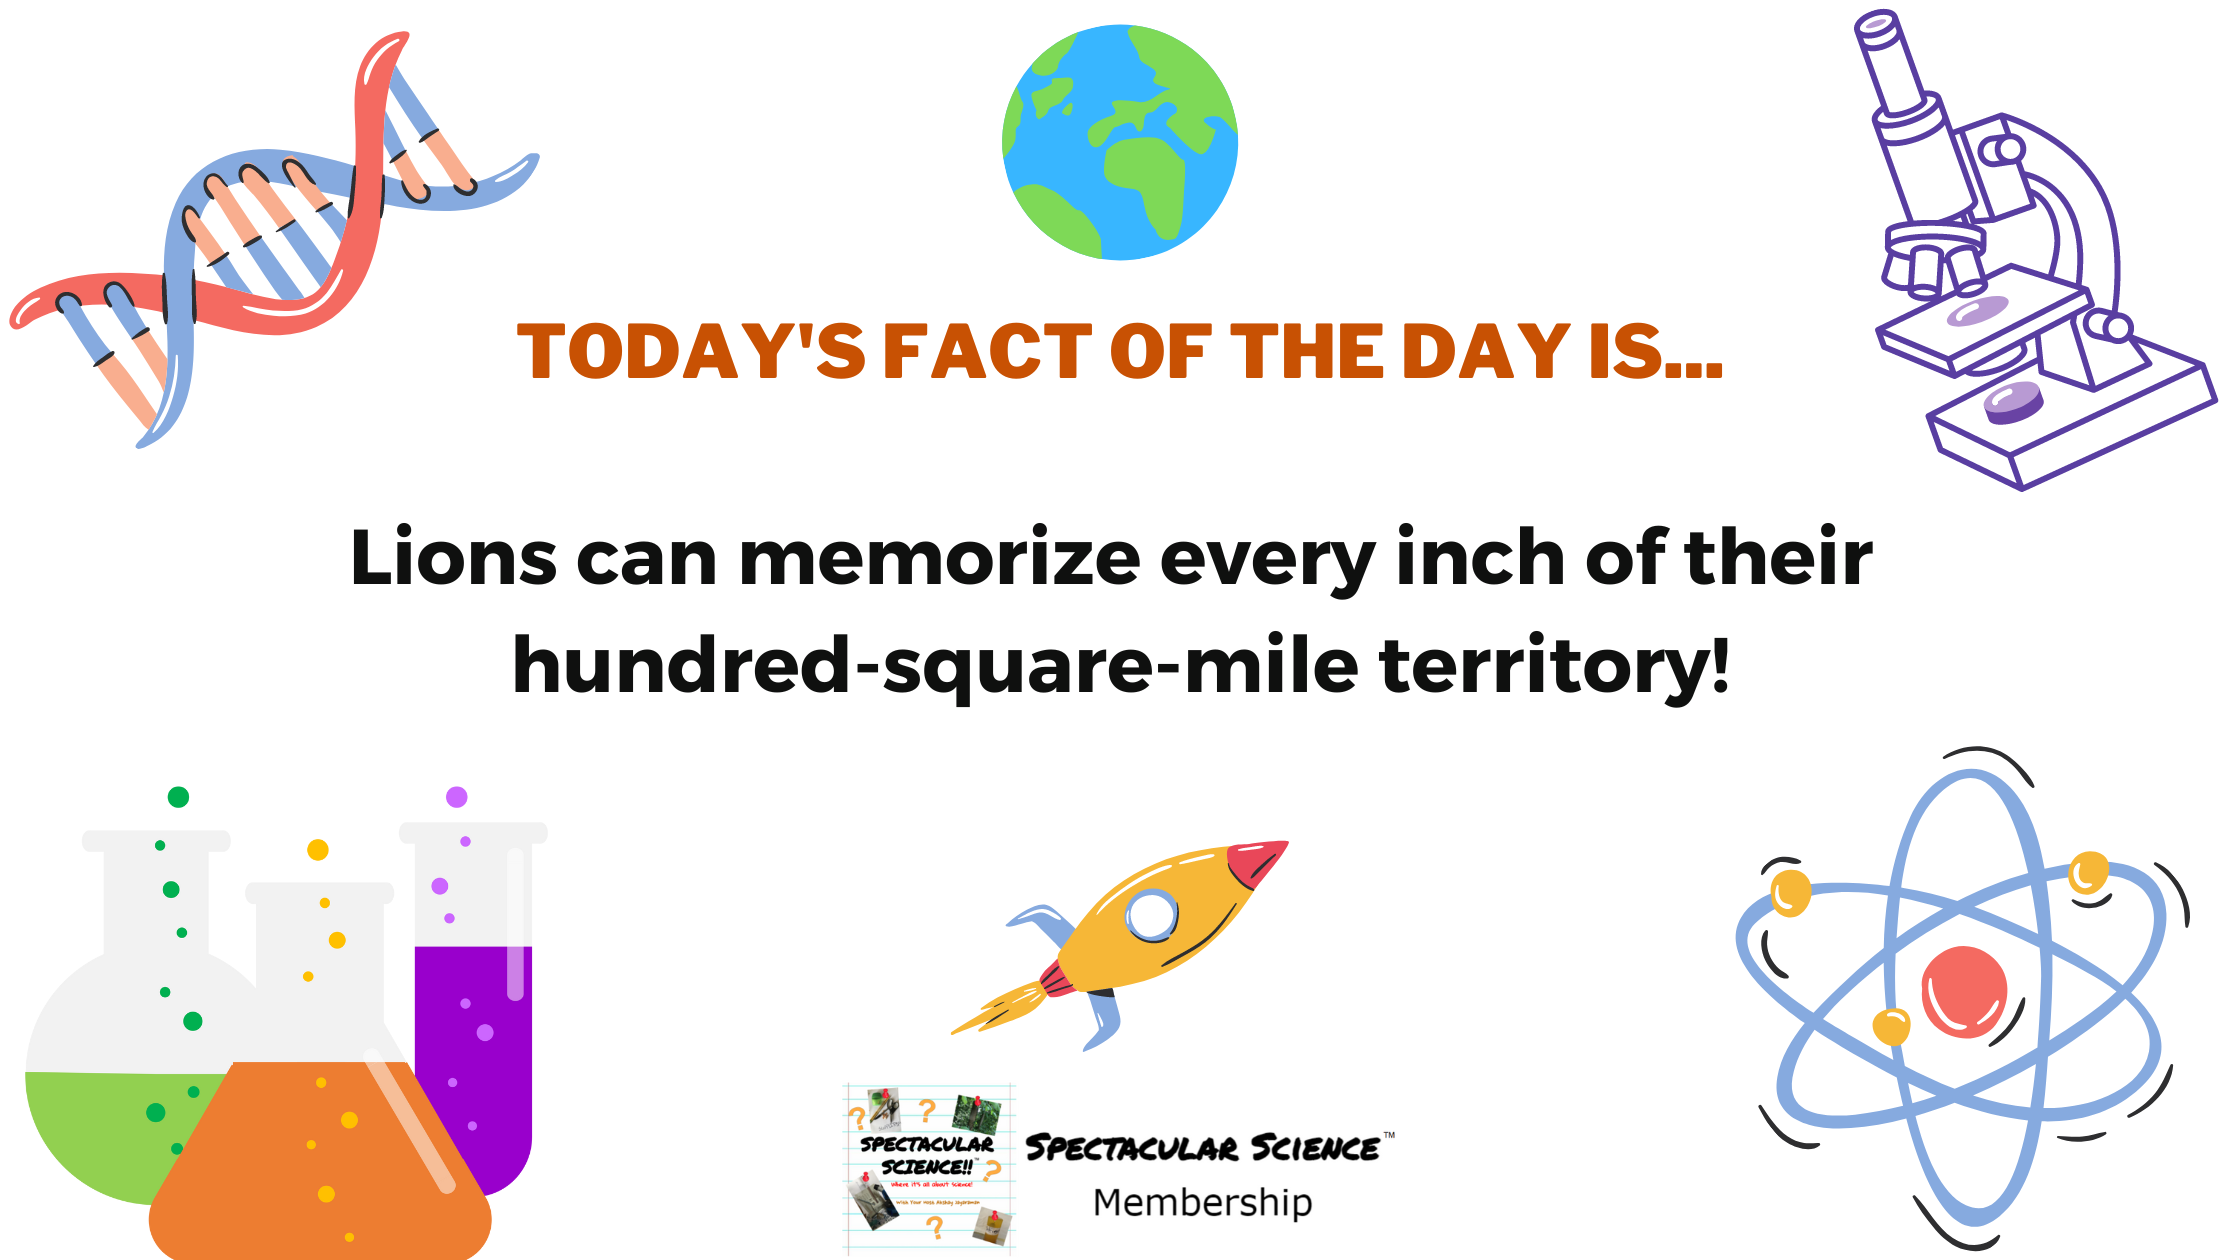 Fact of the Day Image August 20th